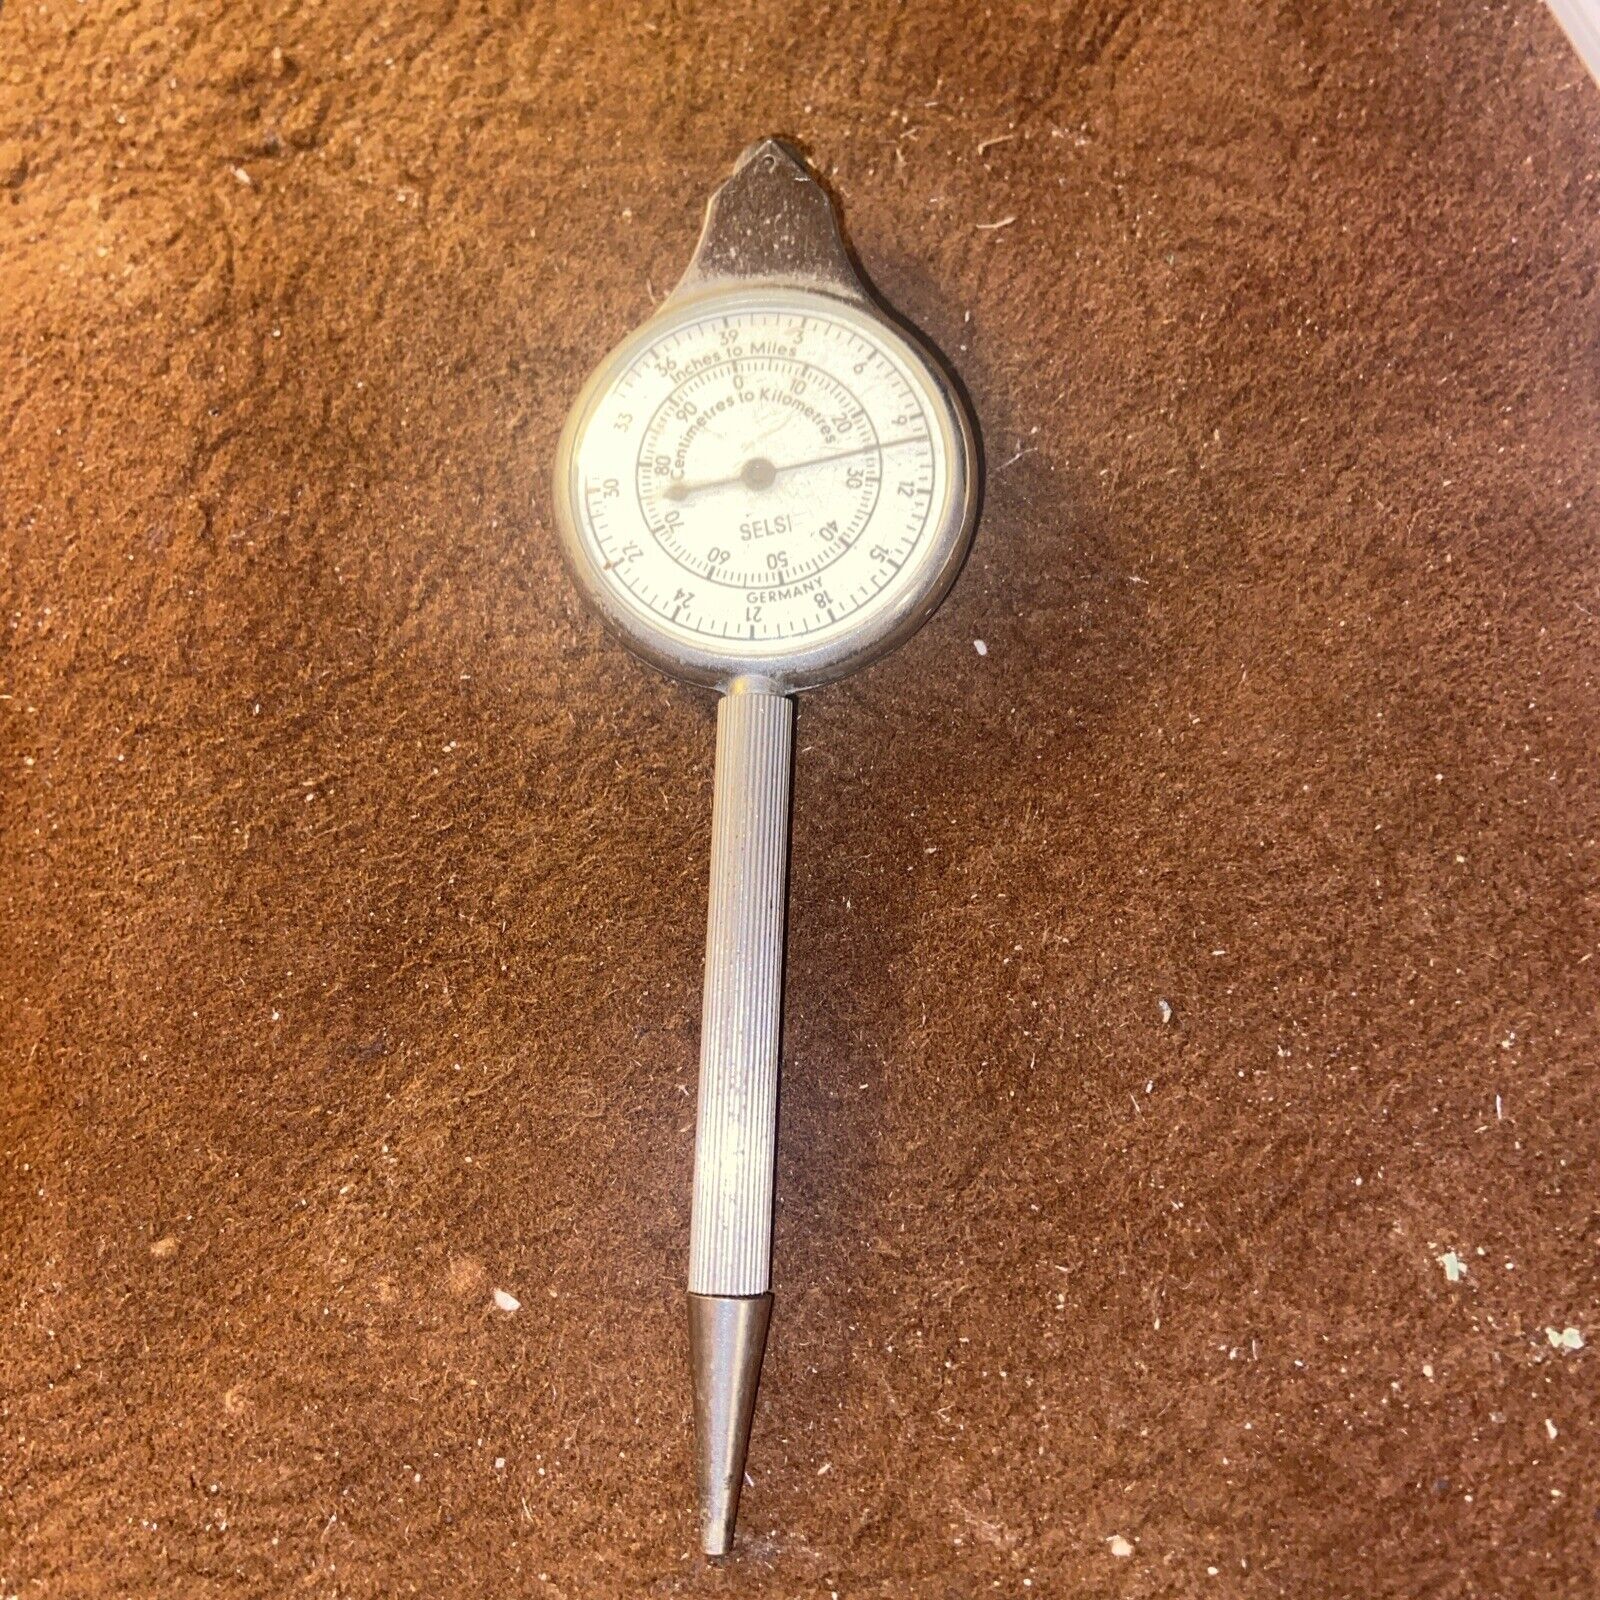 Vintage Selsi Opisometer Pencil Tool Inches Miles Centimeters Kilometers Germany